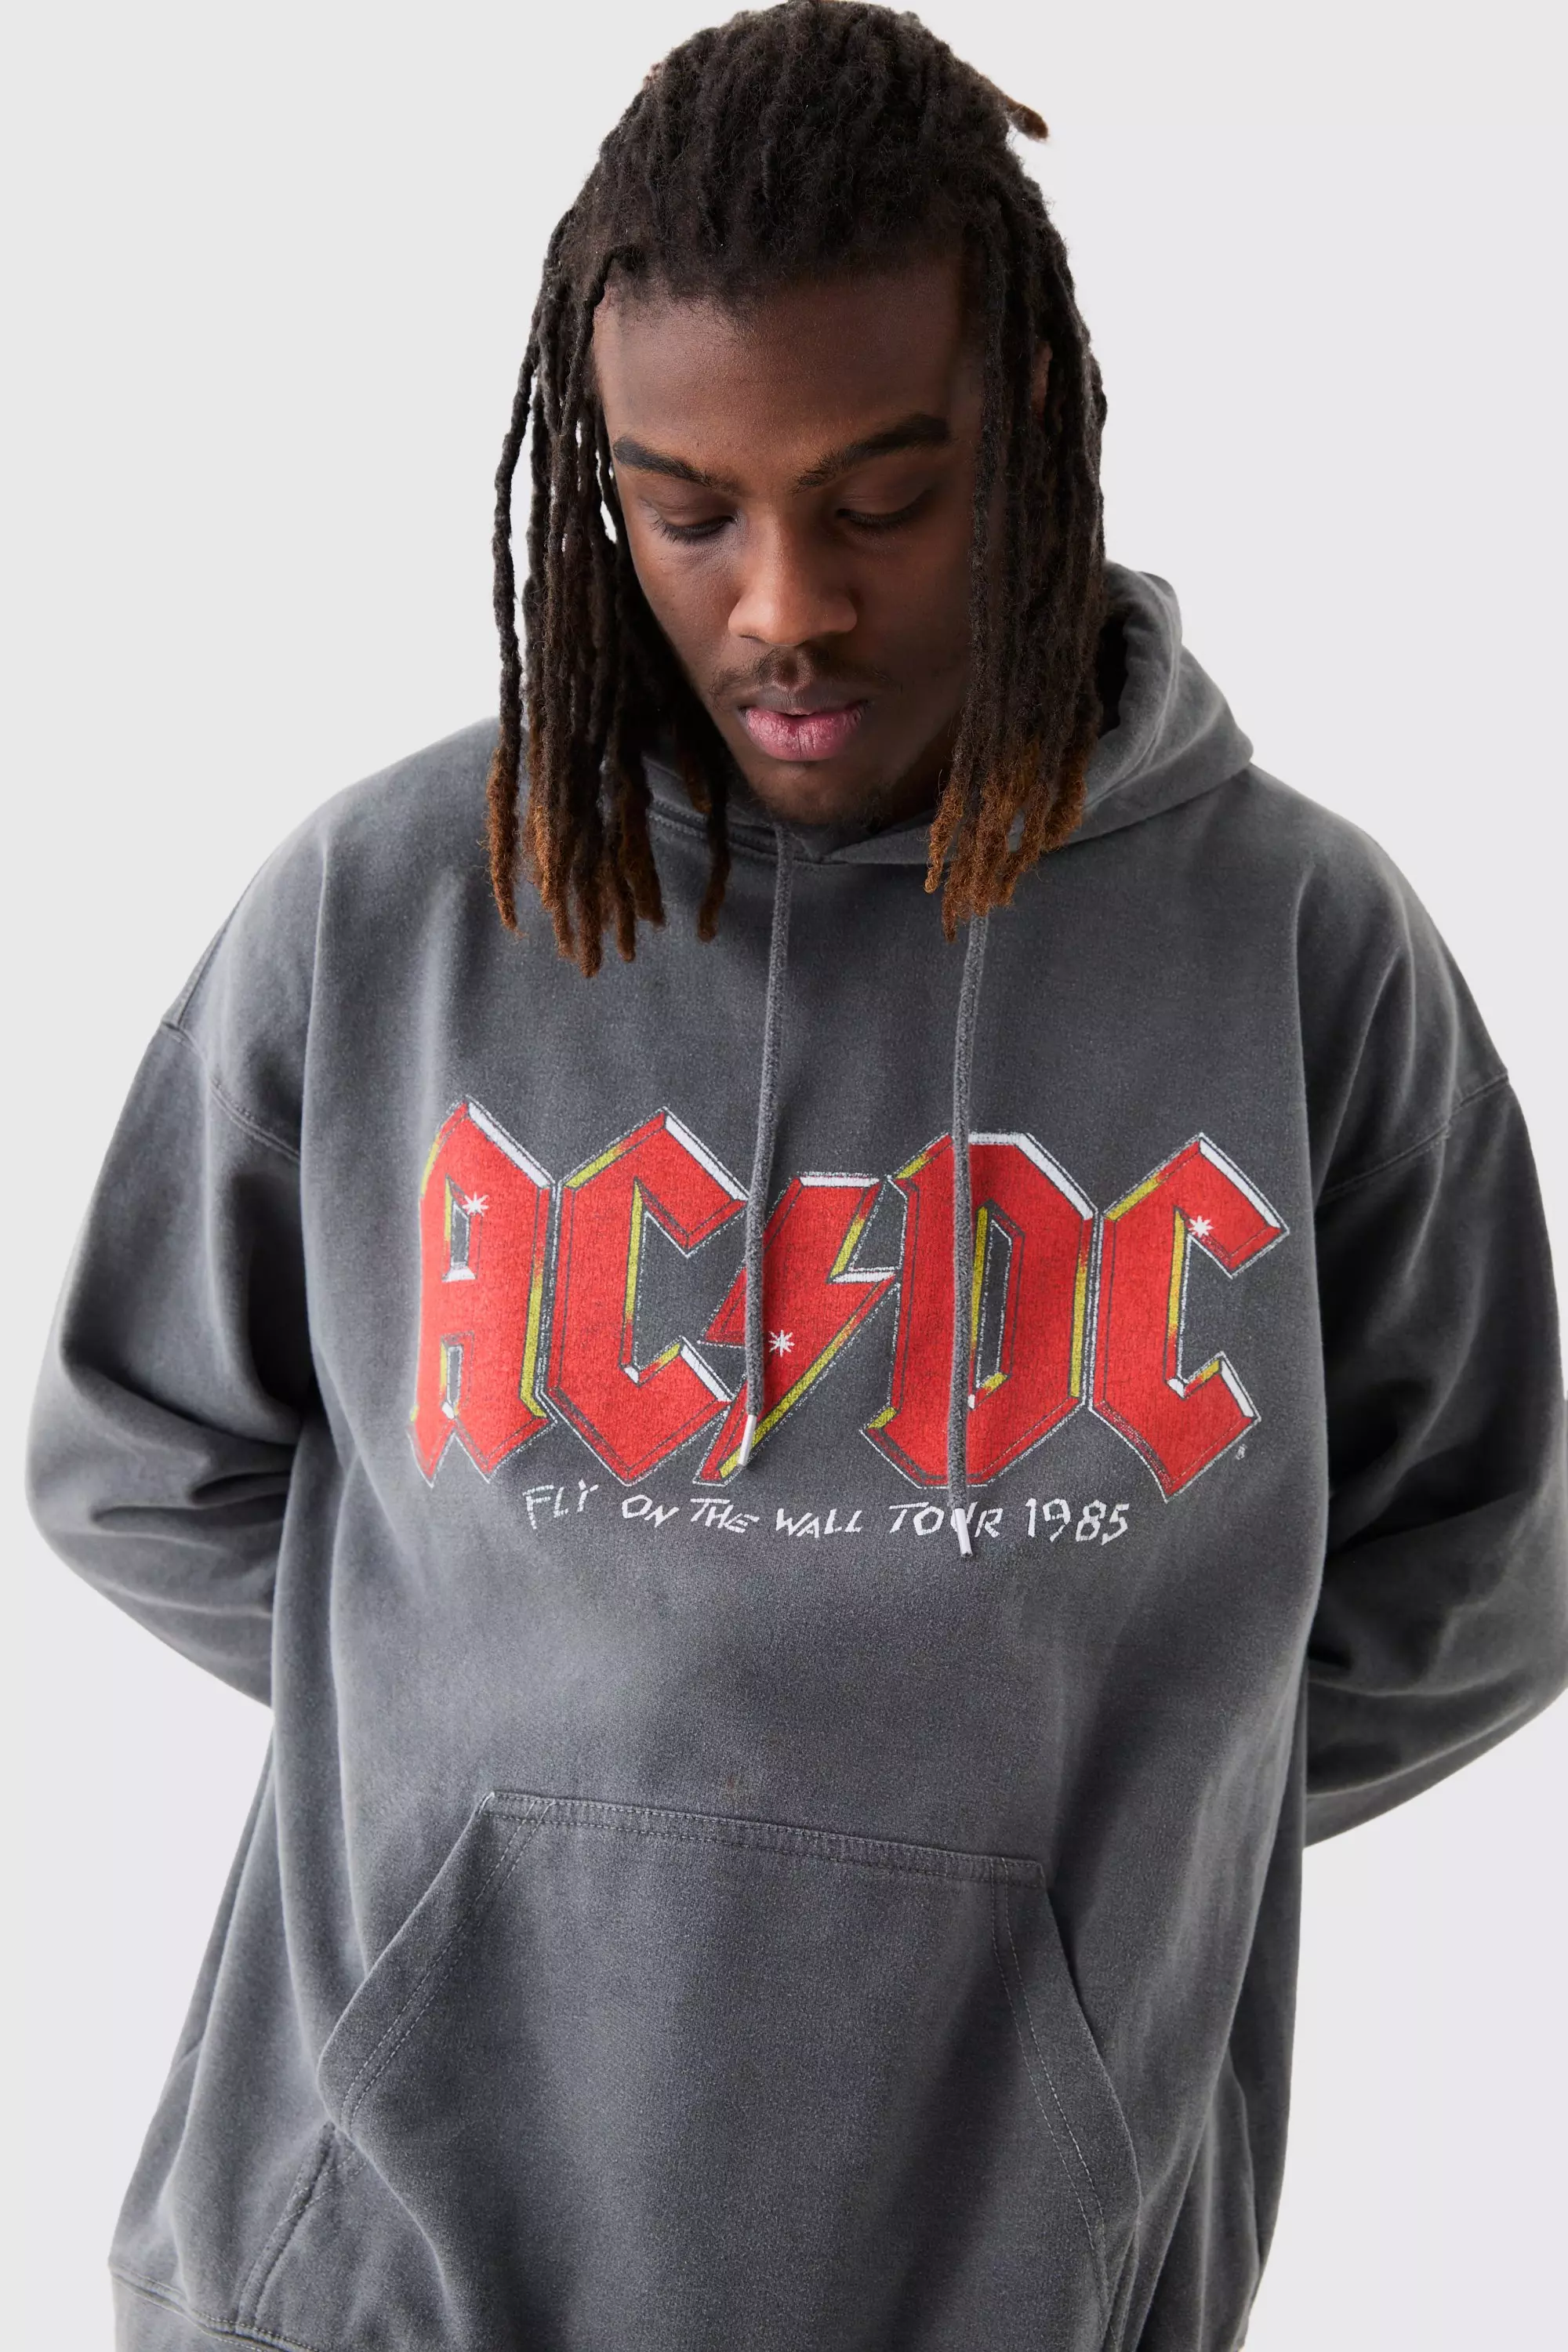 Charcoal Grey Oversized Acdc Wash License Hoodie